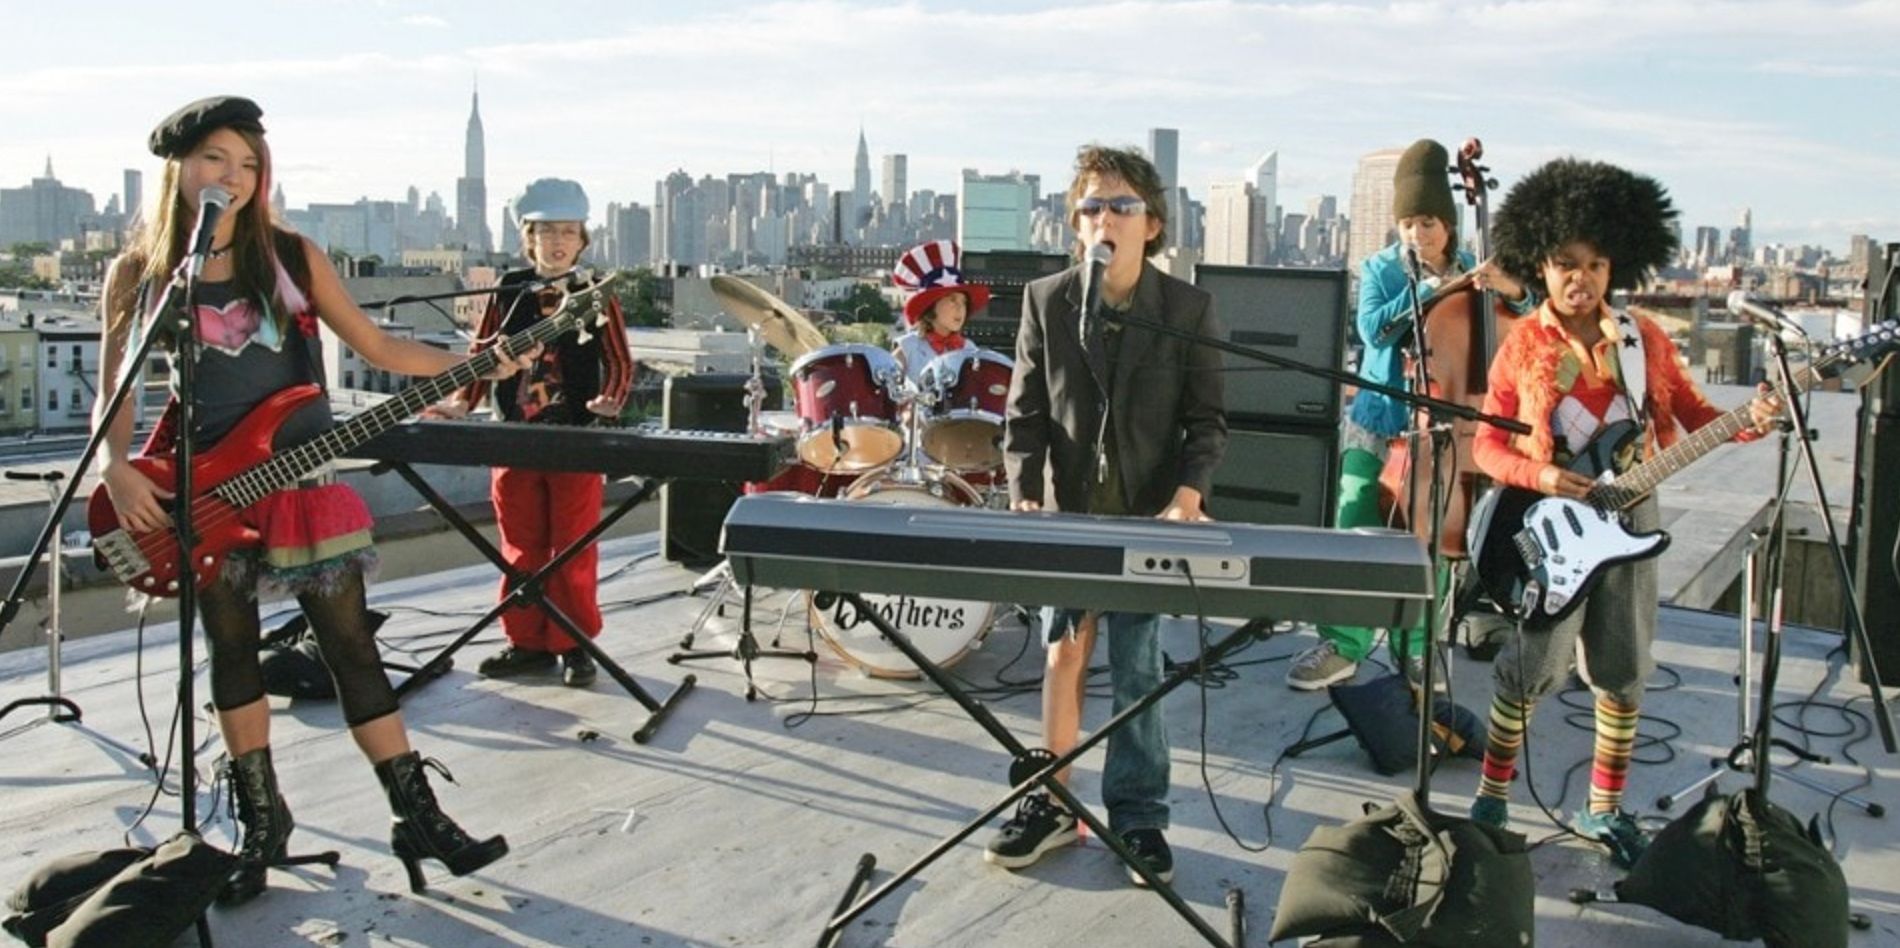 The Naked Brothers Band performs on a rooftop